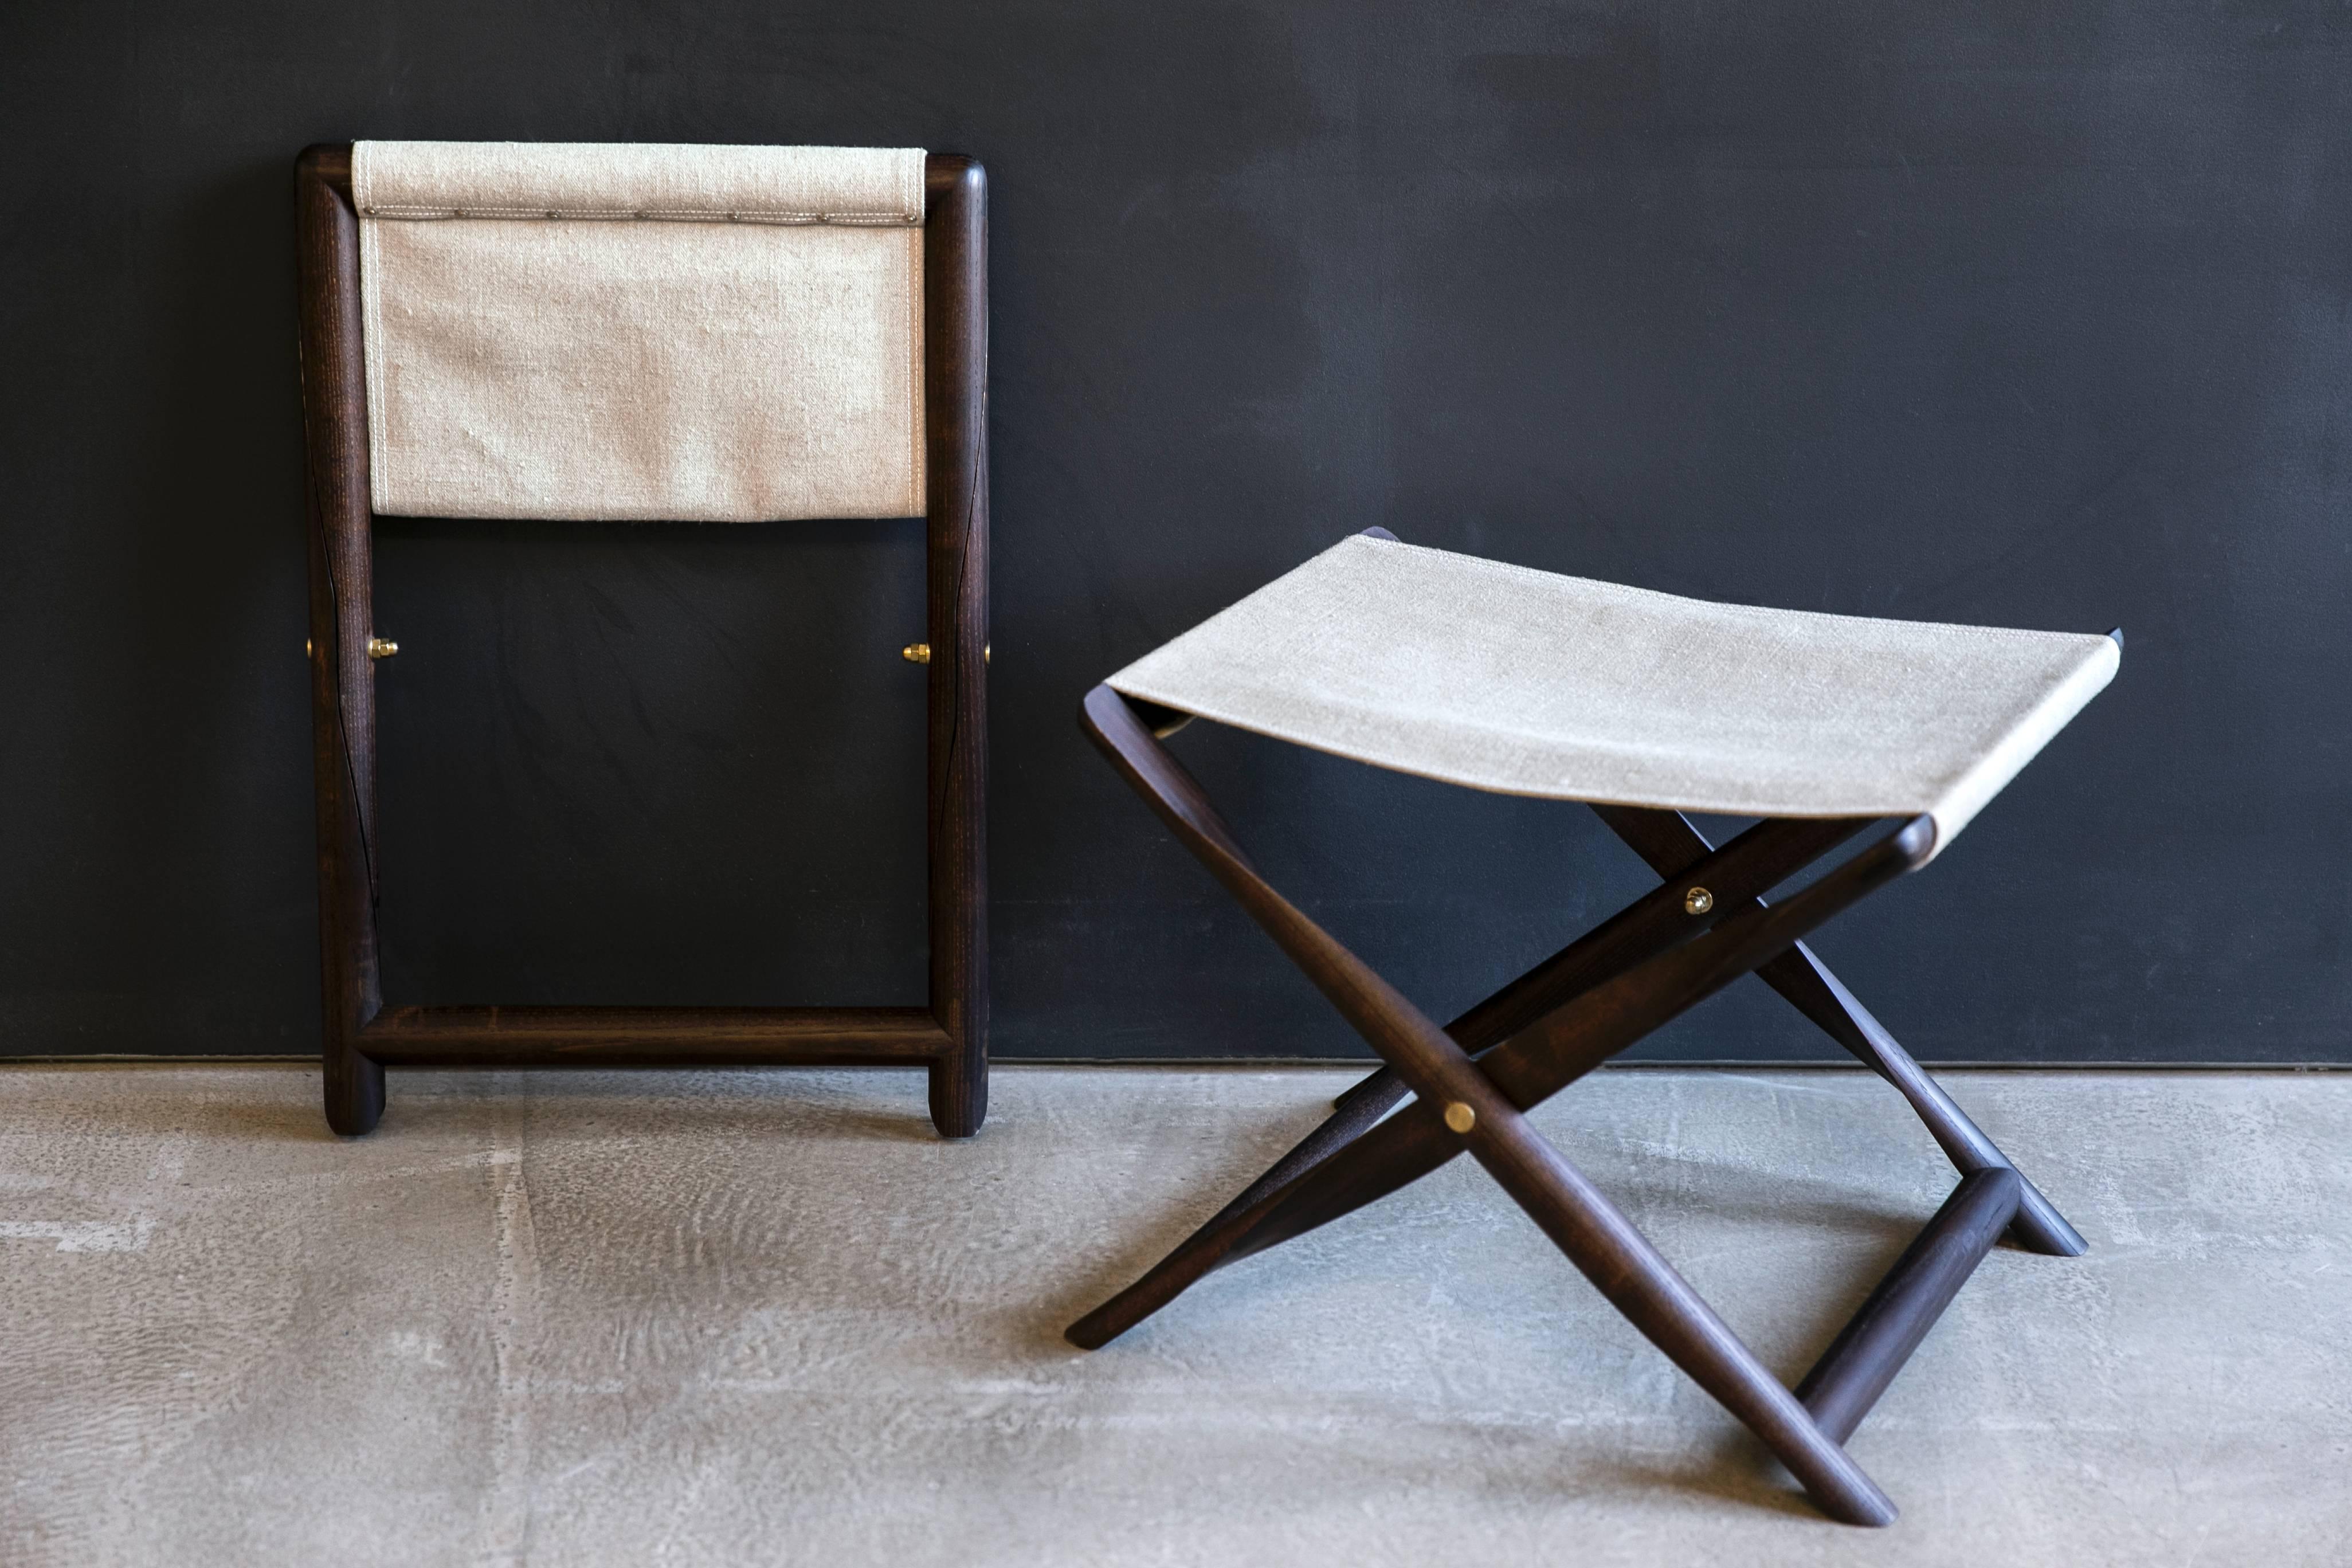 Pair of Propeller Stools in Fumed Ash with Linen Seats by Kaare Klint im Zustand „Hervorragend“ im Angebot in New York, NY